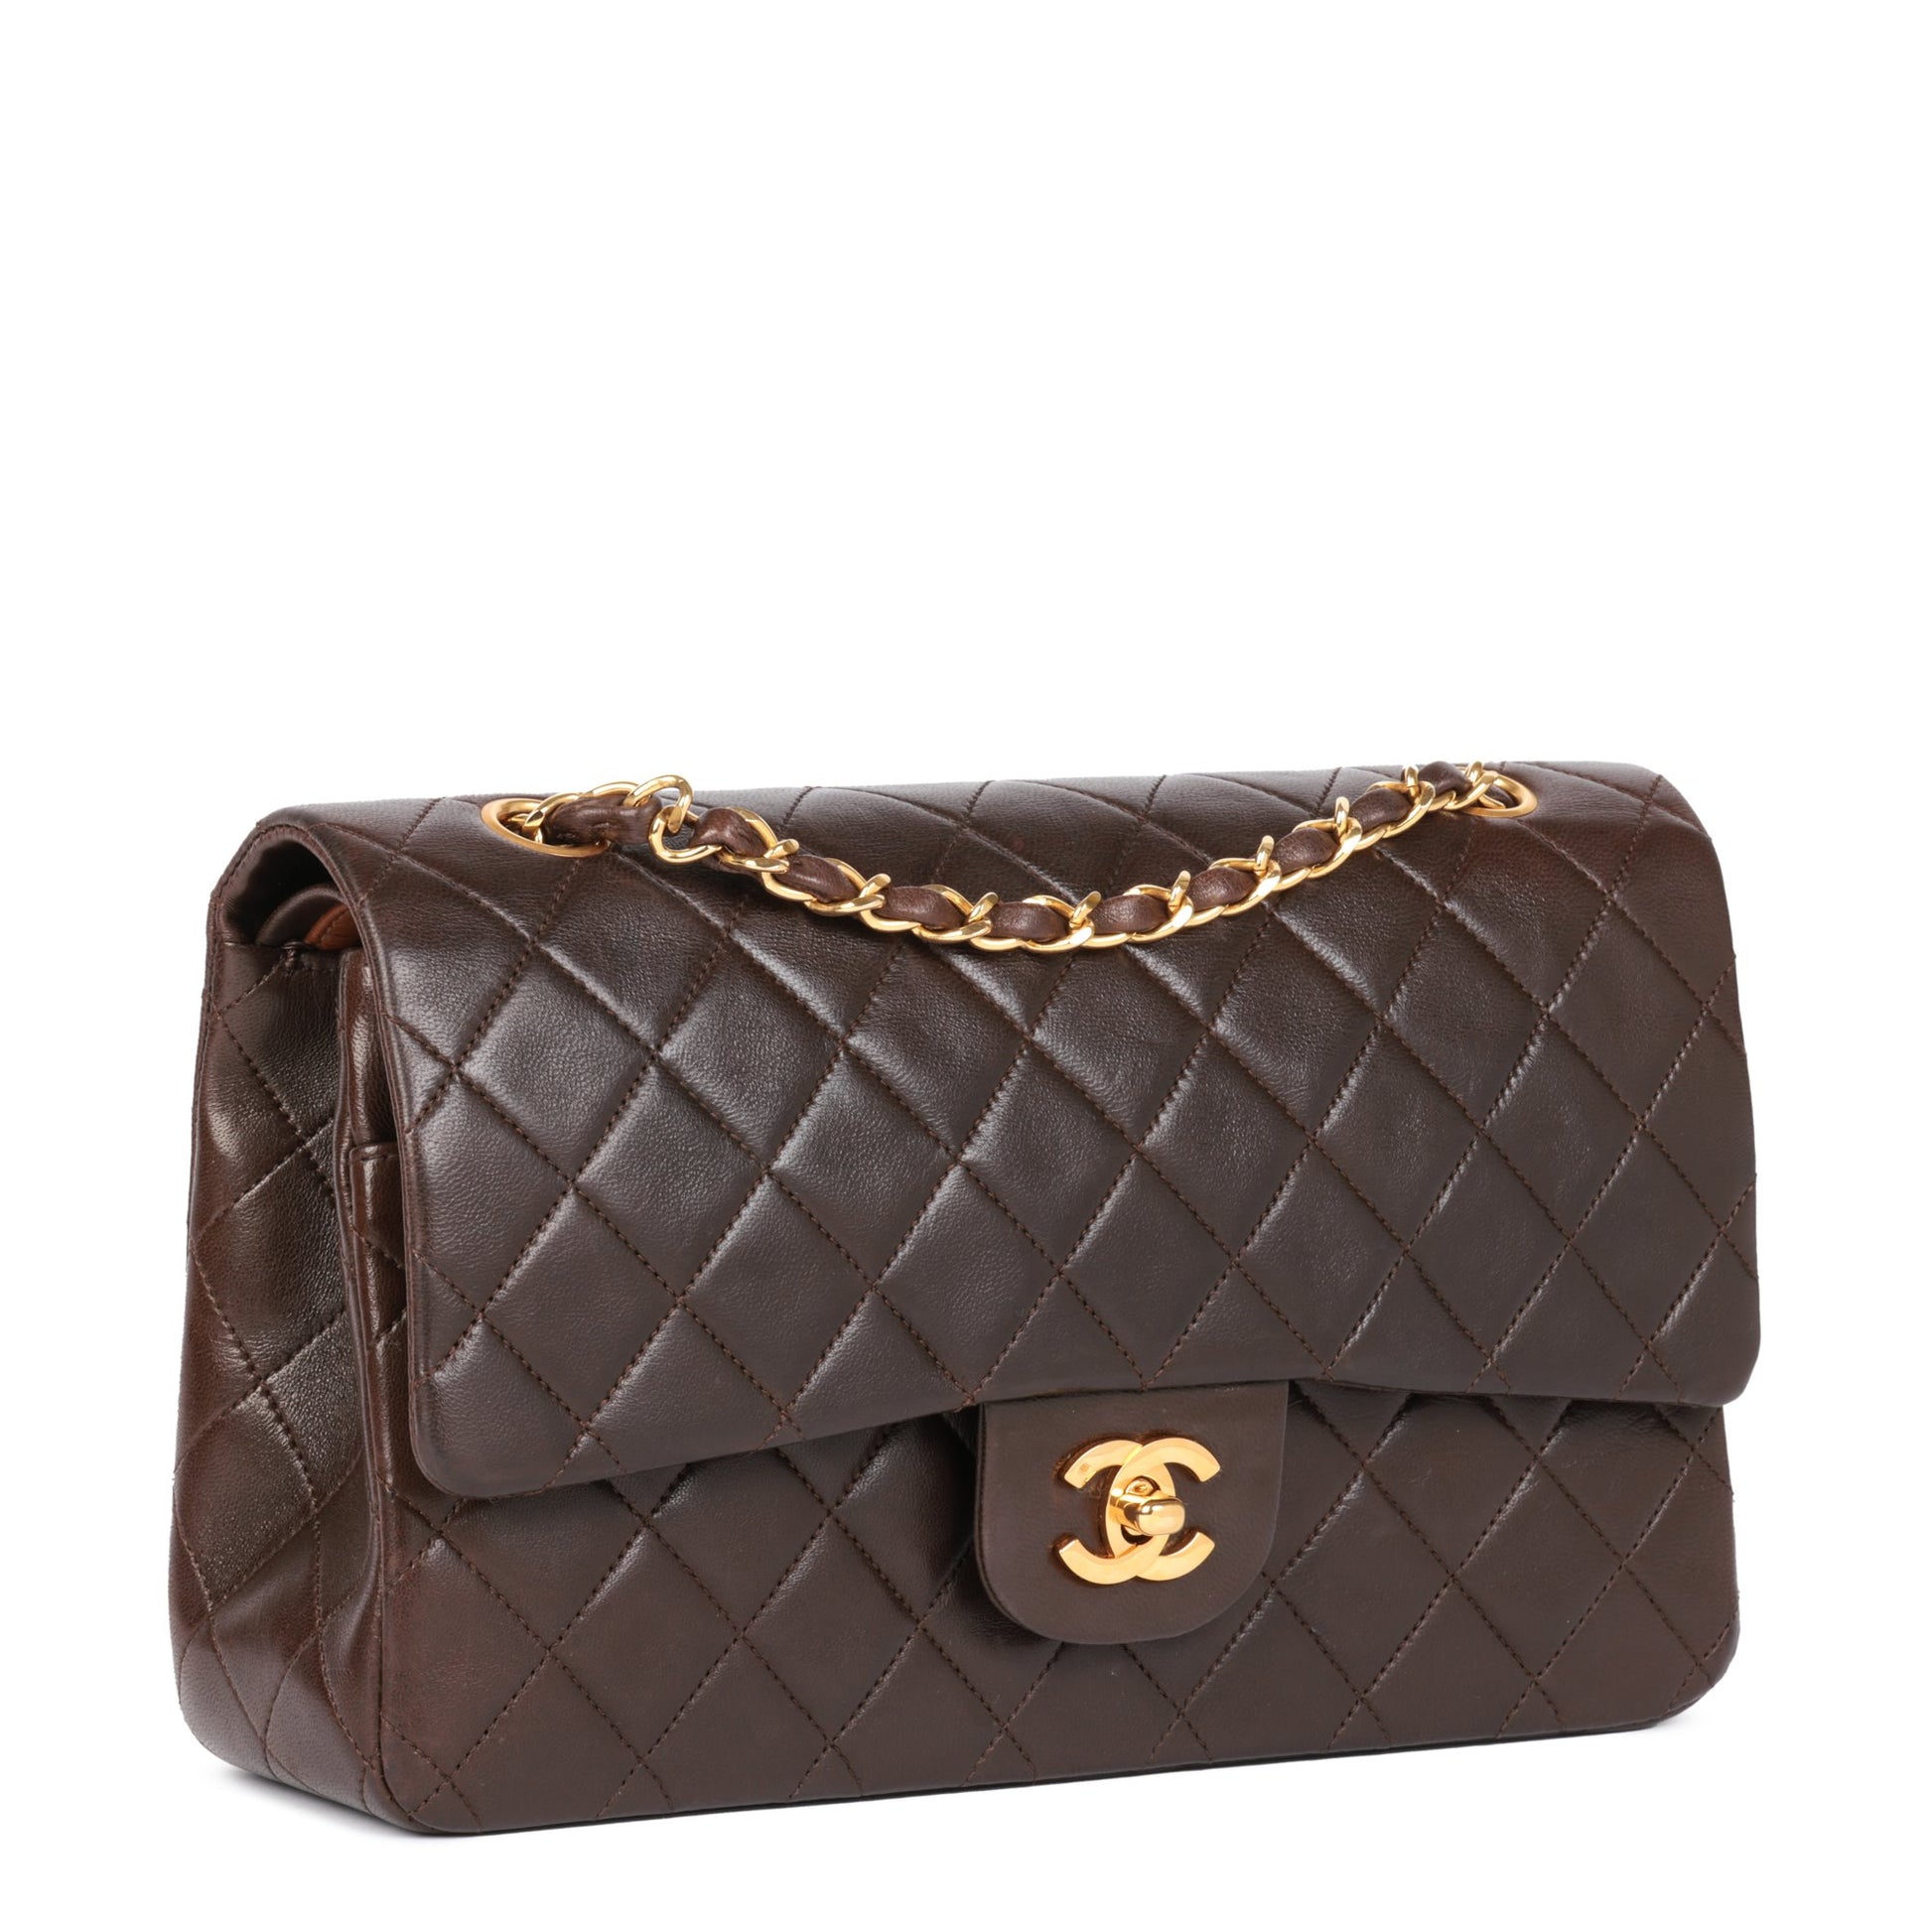 Chanel Brown Quilted Patent Leather Reissue 2.55 Classic 227 Flap